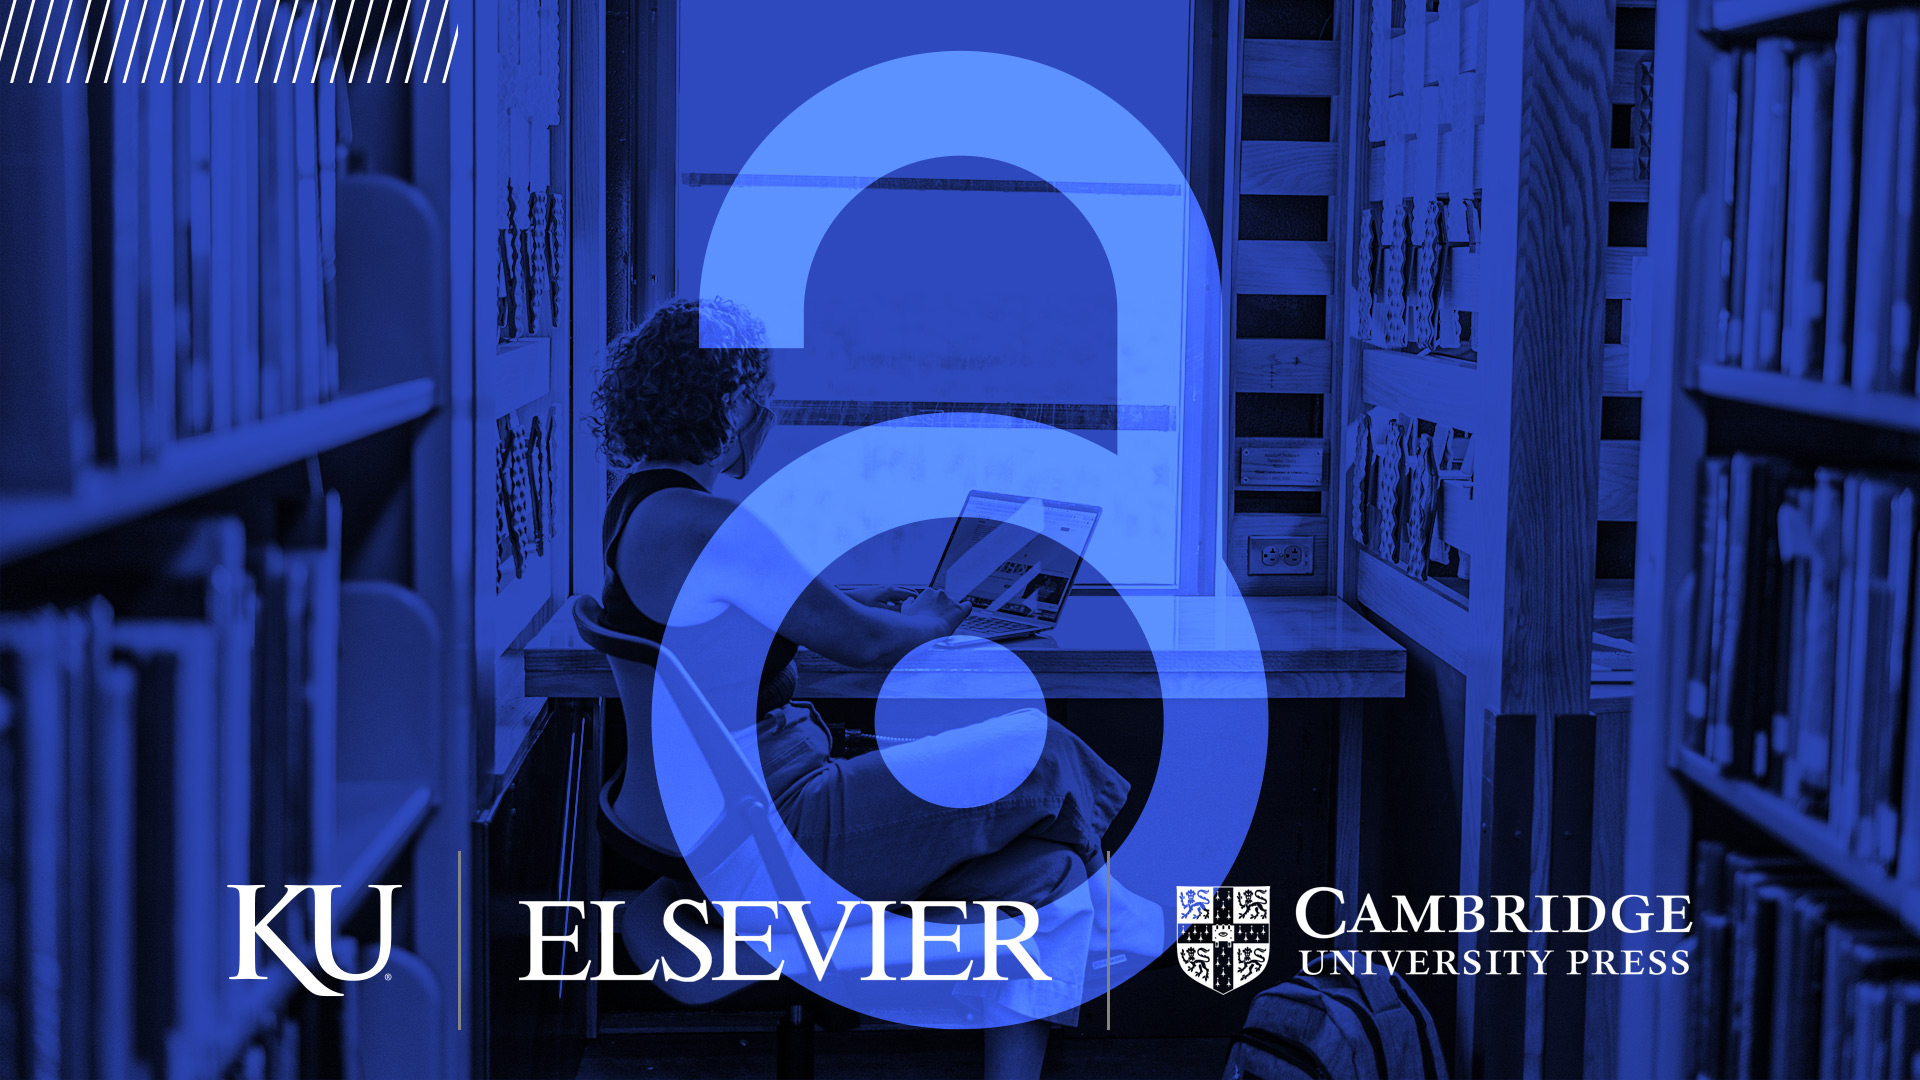 In the background a student sits in the Watson Library Study Carrels, overlaid with the logos of KU, Elsevier and Cambridge University Press.